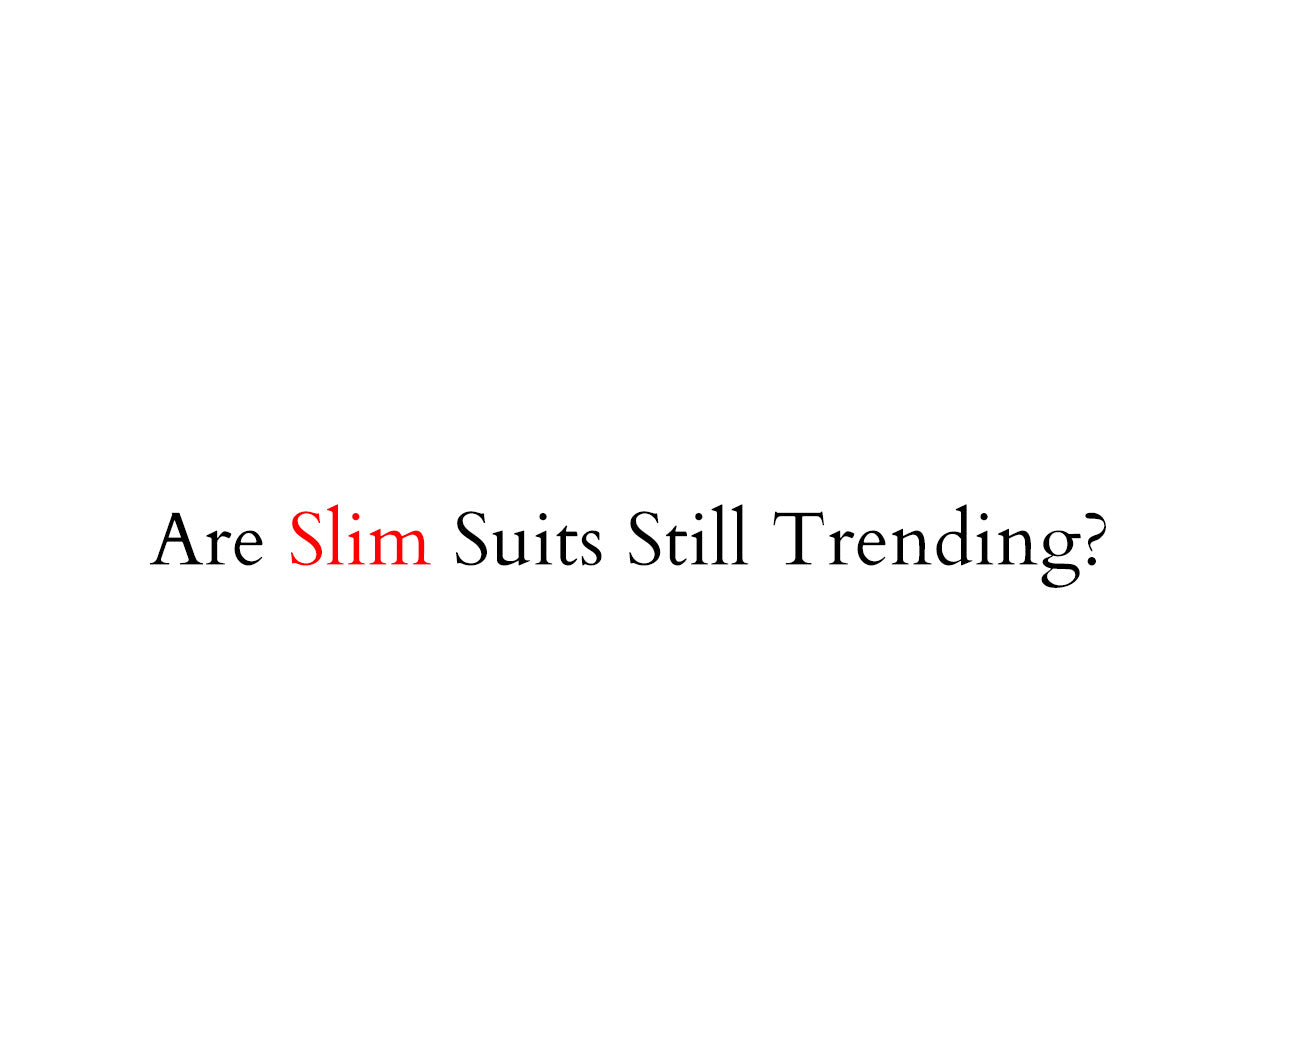 Are Slim Suits Losing Popularity at Local Stores?